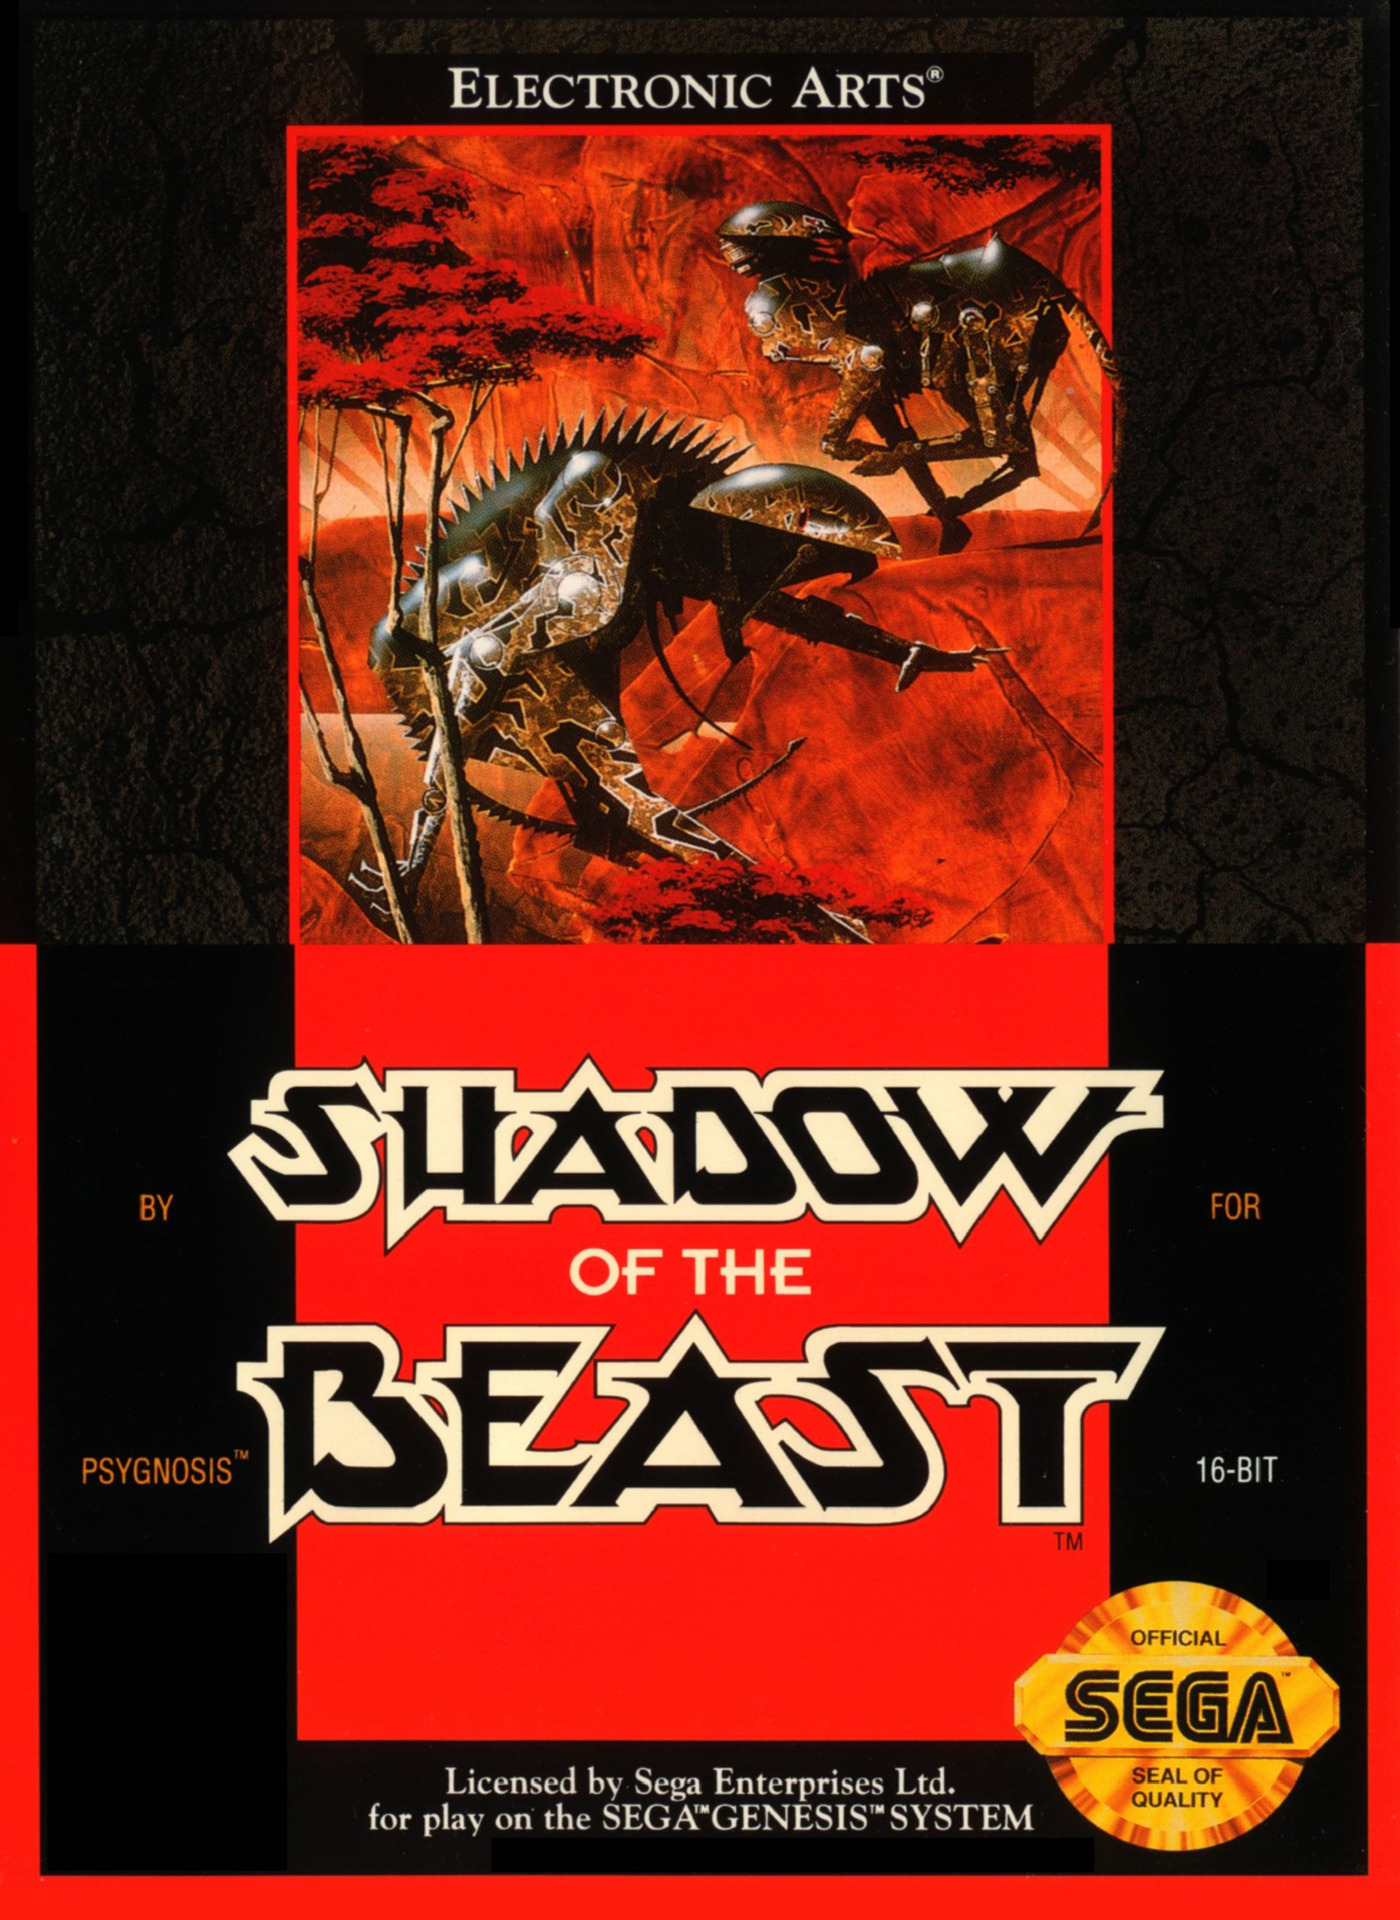 Shadow of the beast steam фото 45